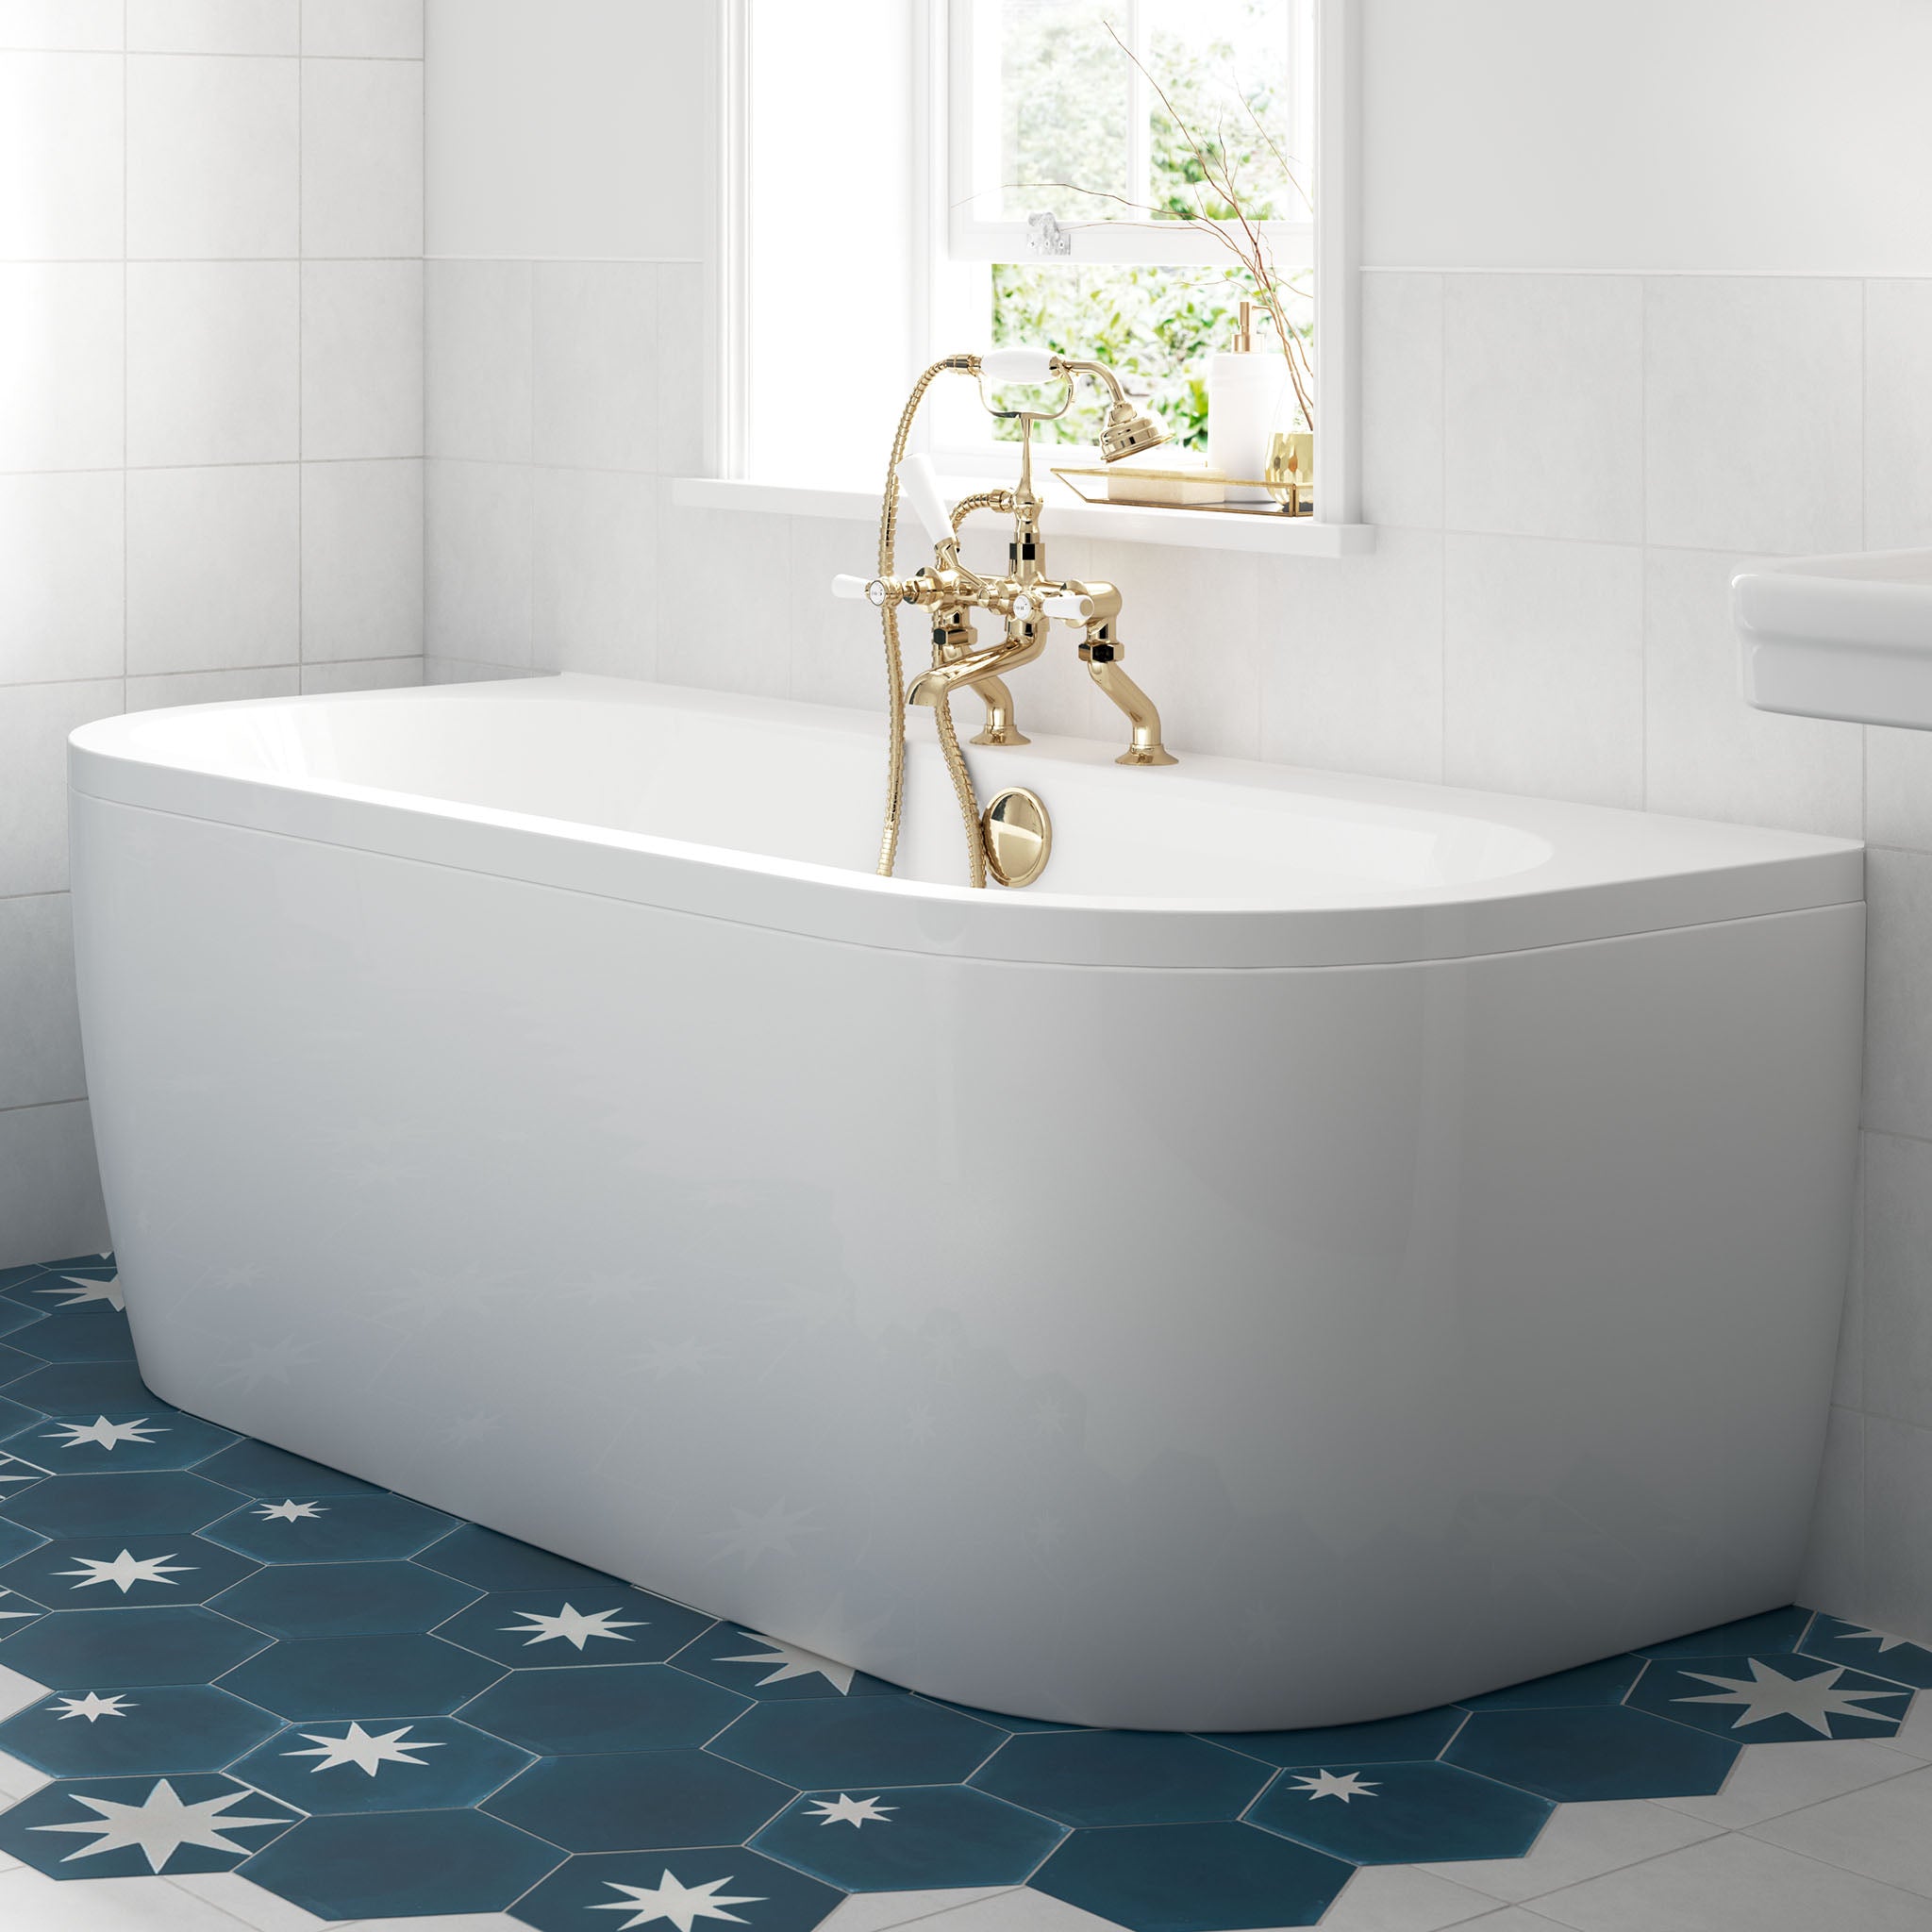 BC Designs Solid Blue Monreale Double Ended Bath 1700 x 750mm